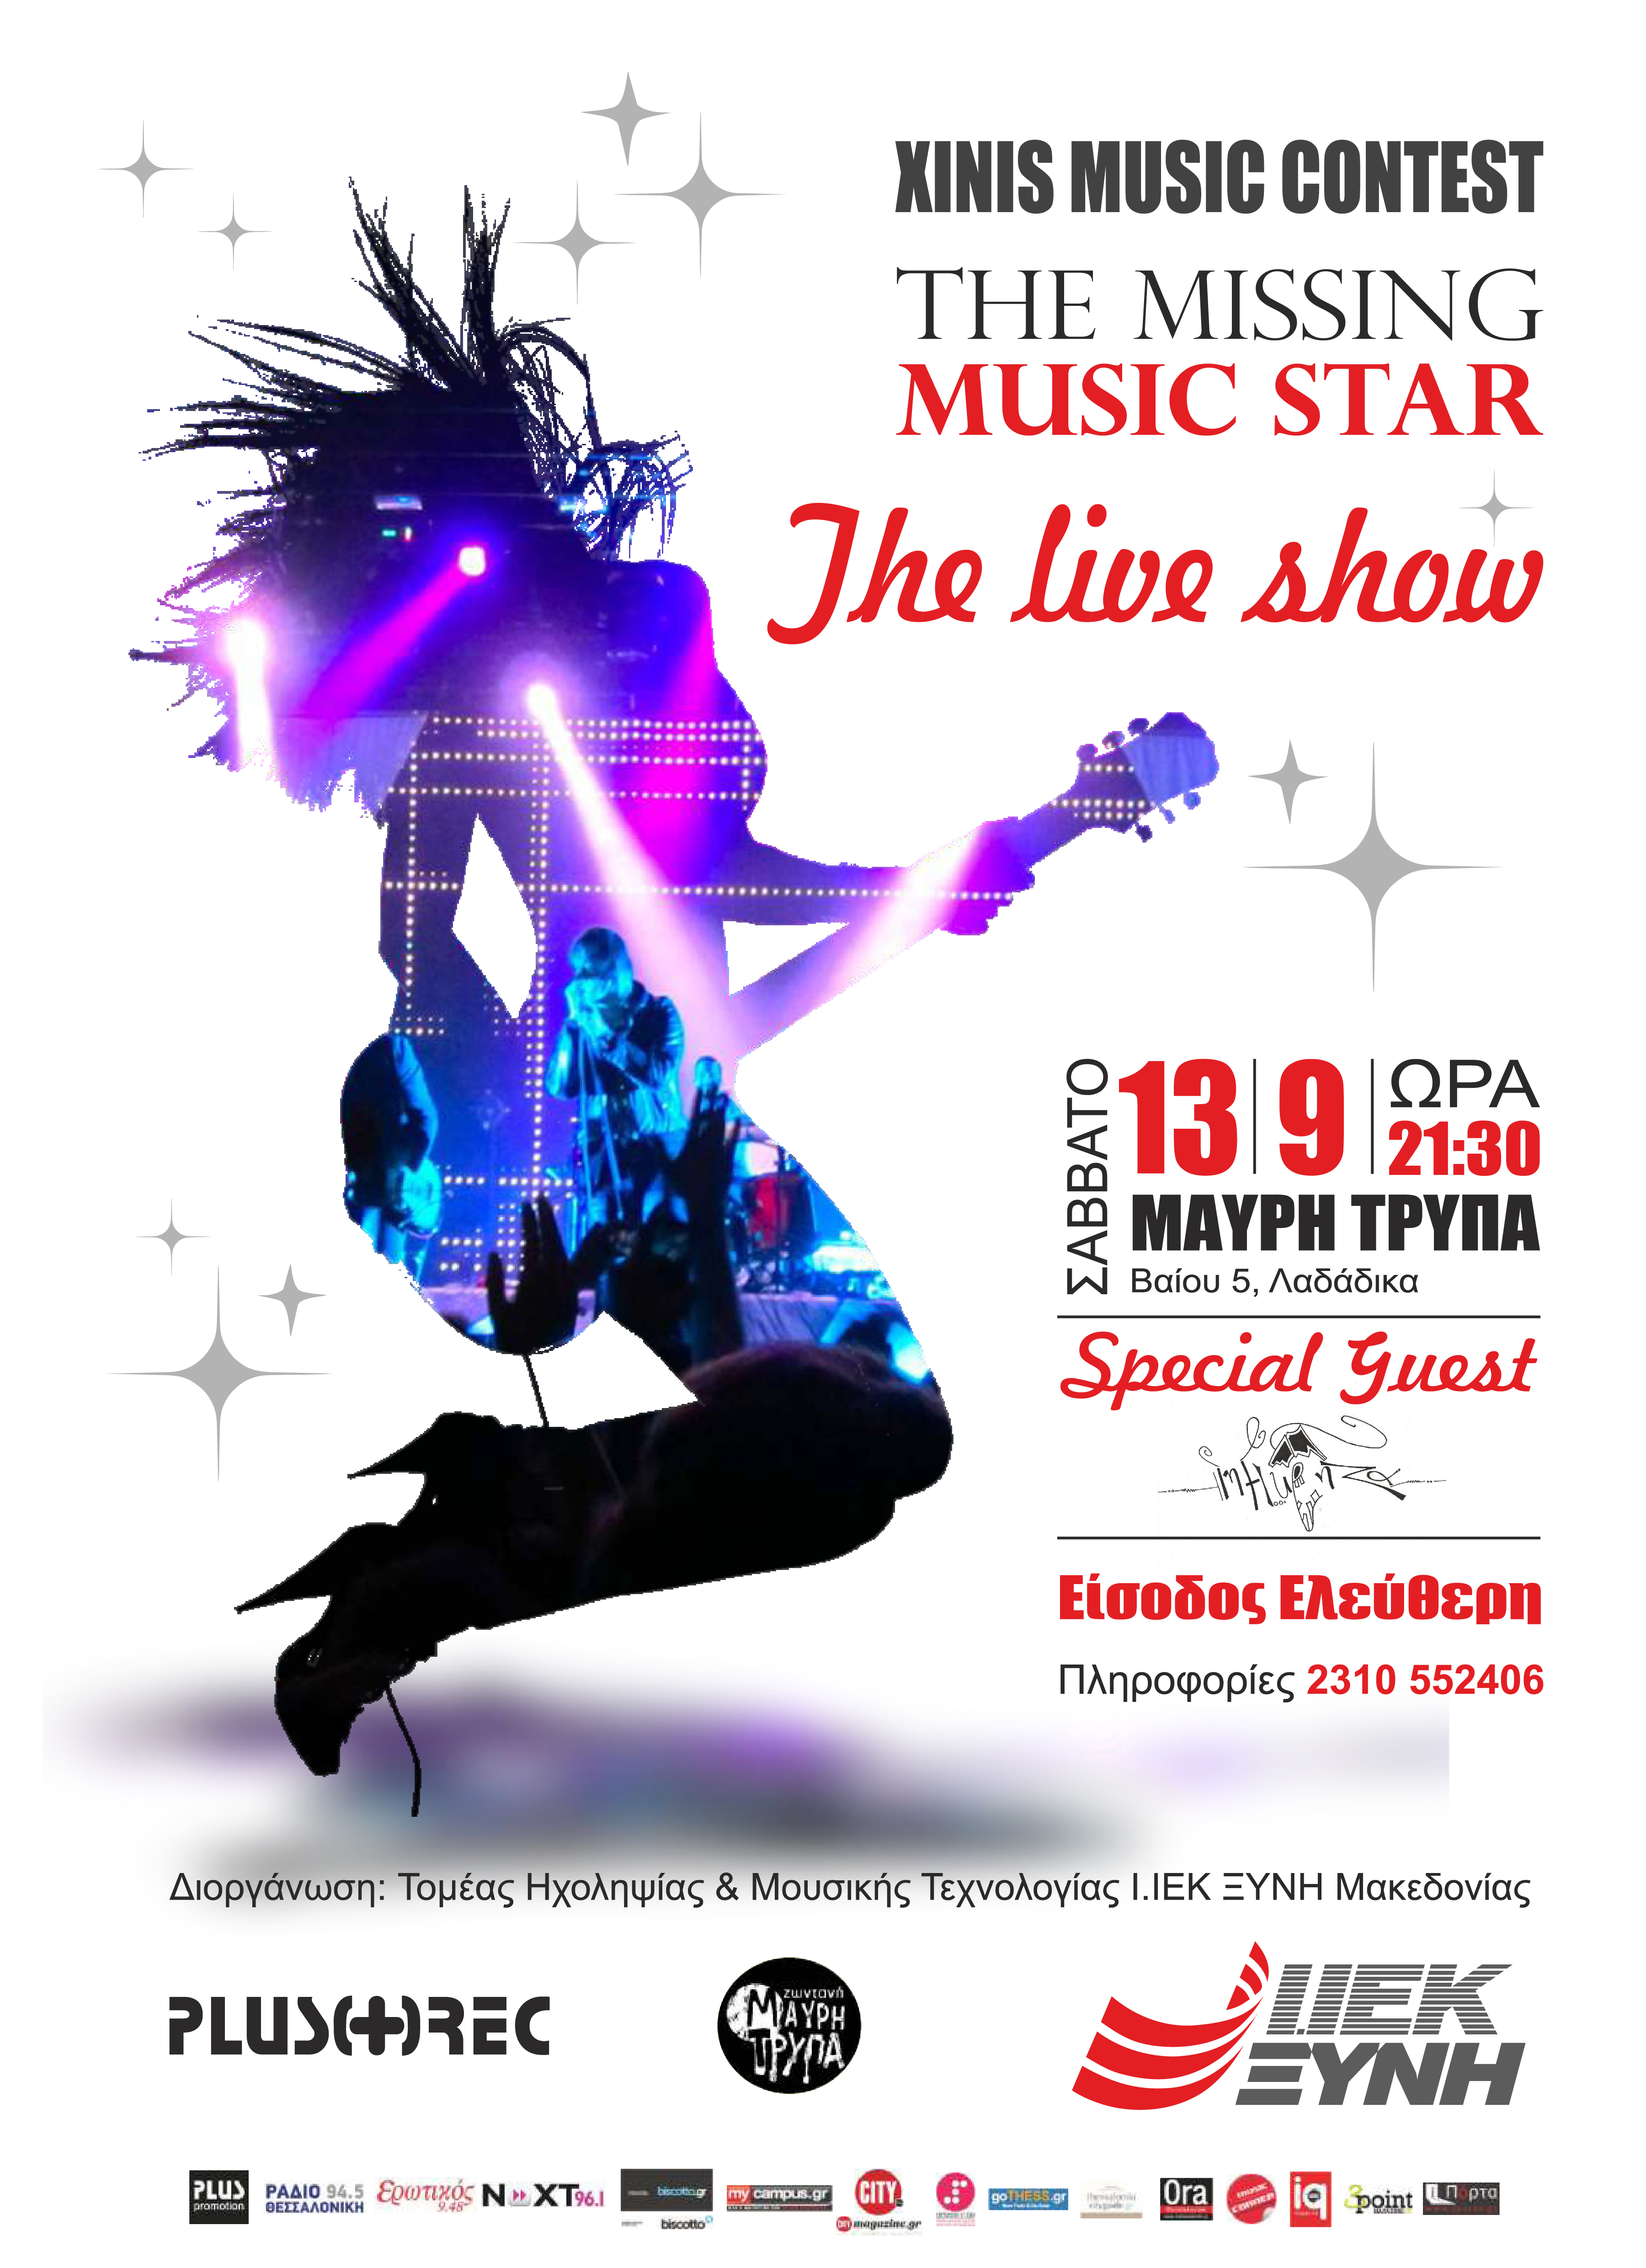 Xinis Music Contest: “The missing Music Star” – The live Show ΣΑΒΒΑΤΟ 13 ΣΕΠΤΕΜΒΡΙΟΥ | ΜΑΥΡΗ ΤΡΥΠΑ Special guest: INFLUENZA